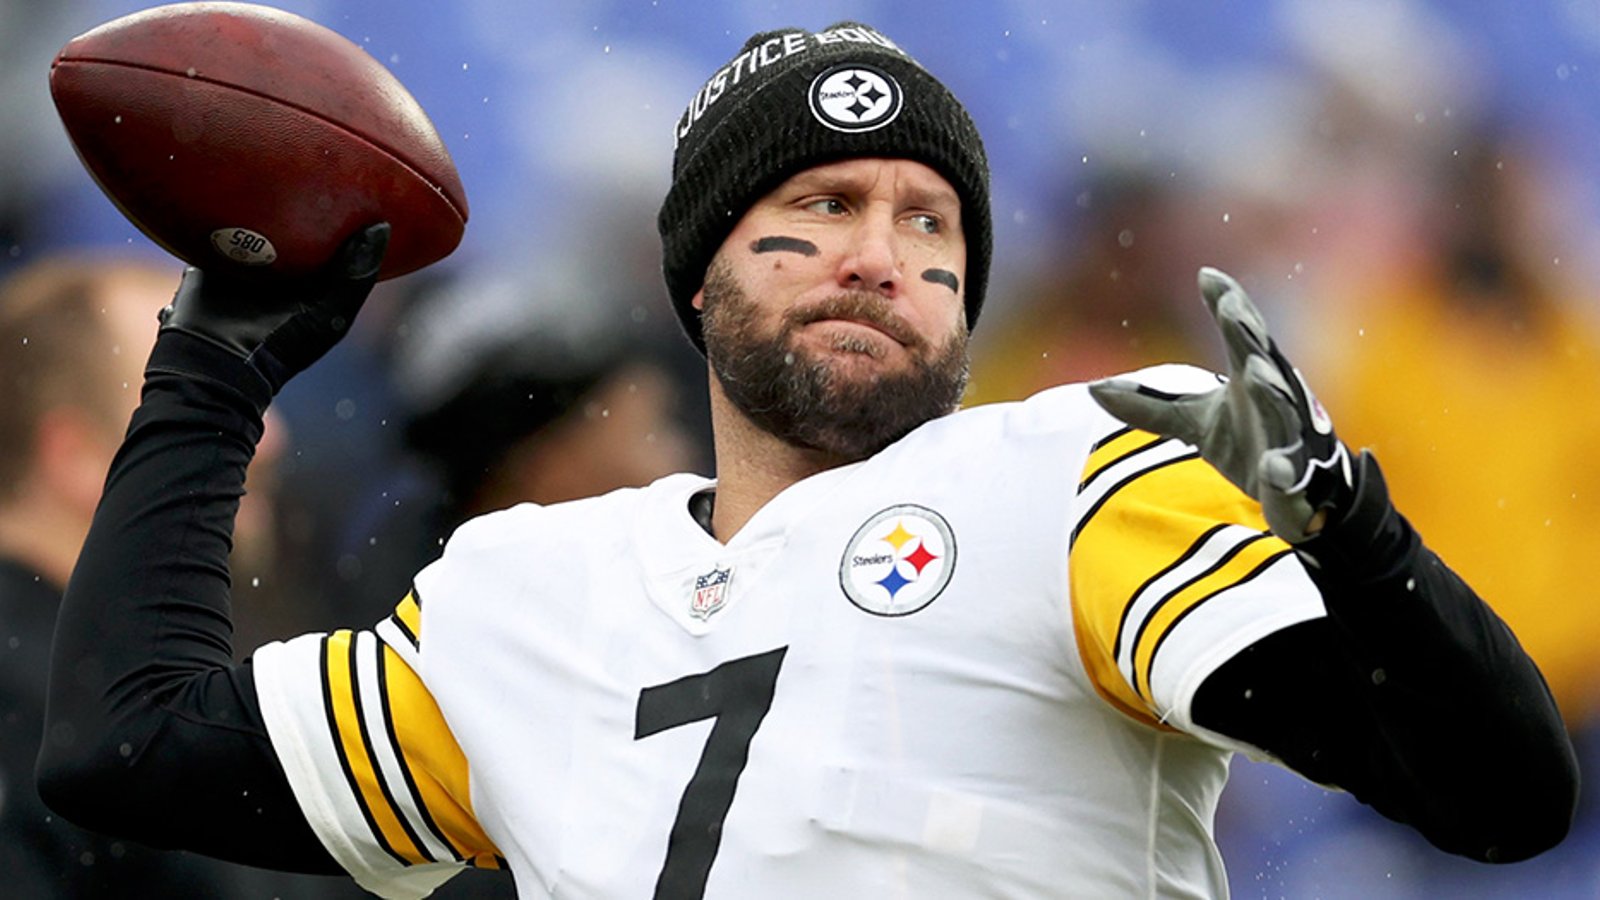 Reports of “bad blood” between Ben Roethlisberger and Steelers! 